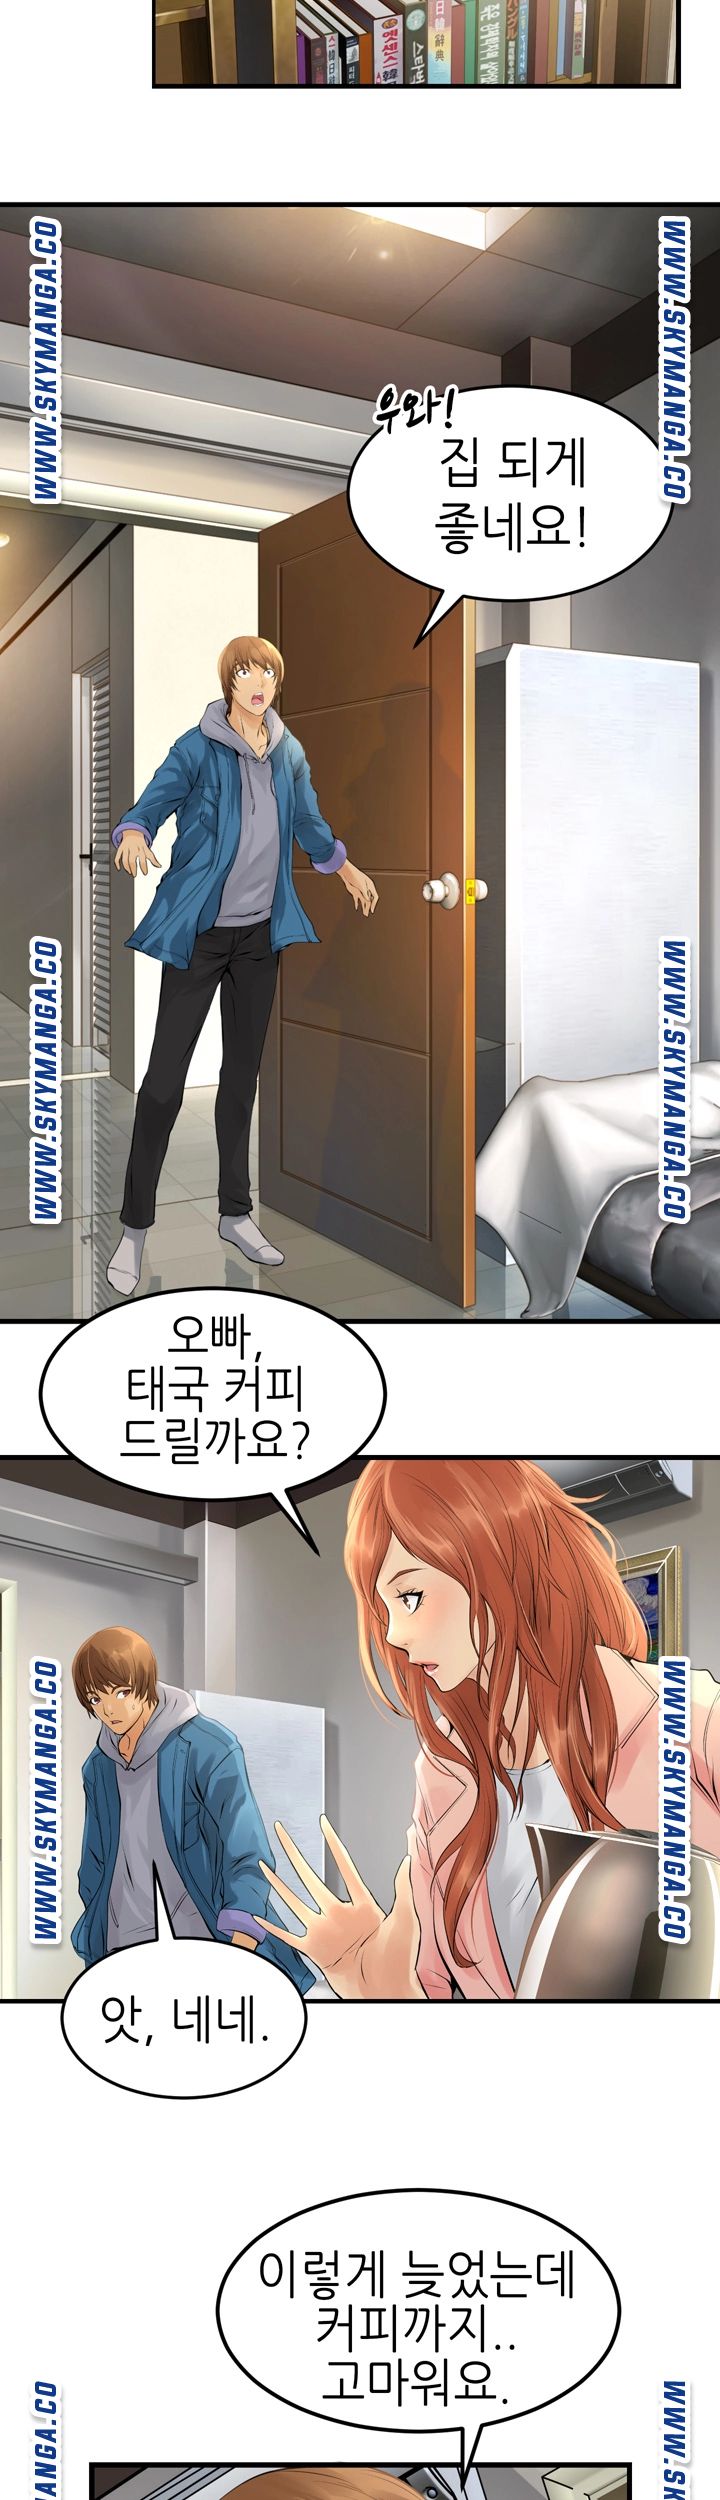 Exchange Student Raw - Chapter 3 Page 3